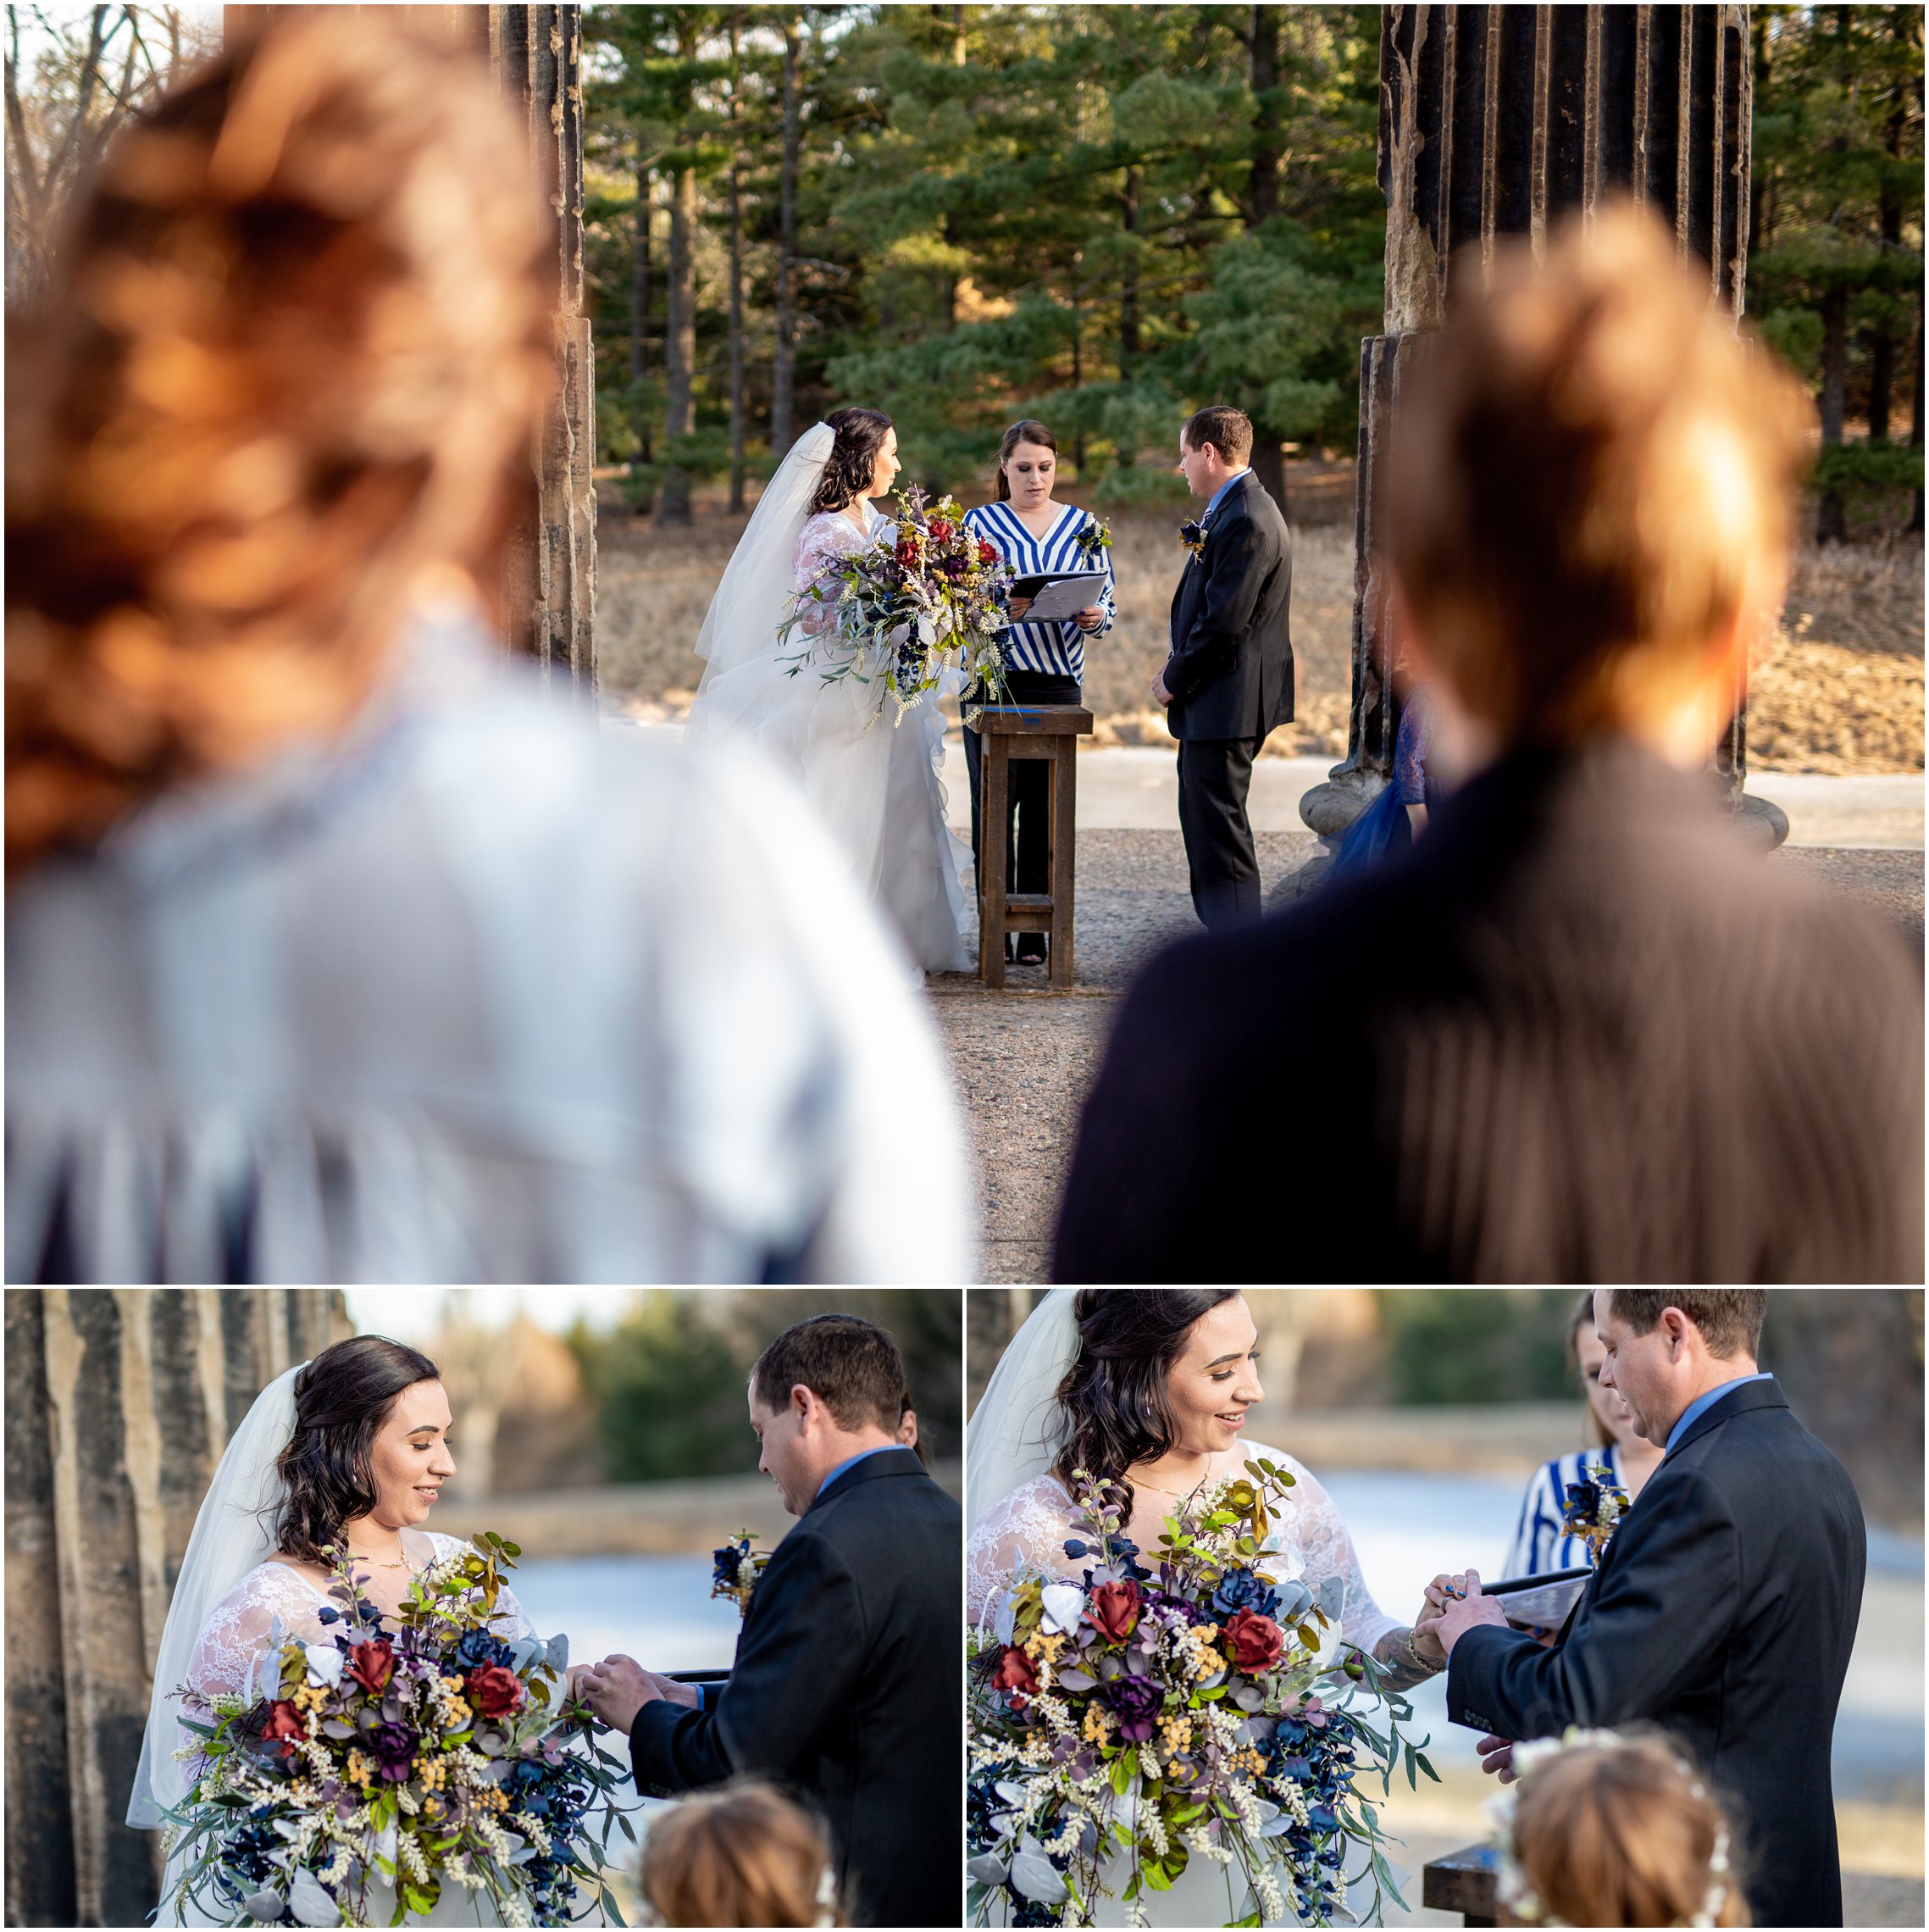 leap day elopement,lincoln bride,lincoln nebraska wedding,lincoln wedding,lincoln wedding photographer,nebraska bride,nebraska elopement,nebraska wedding,pioneers park elopement,pioneers park lincoln wedding,pioneers park wedding,